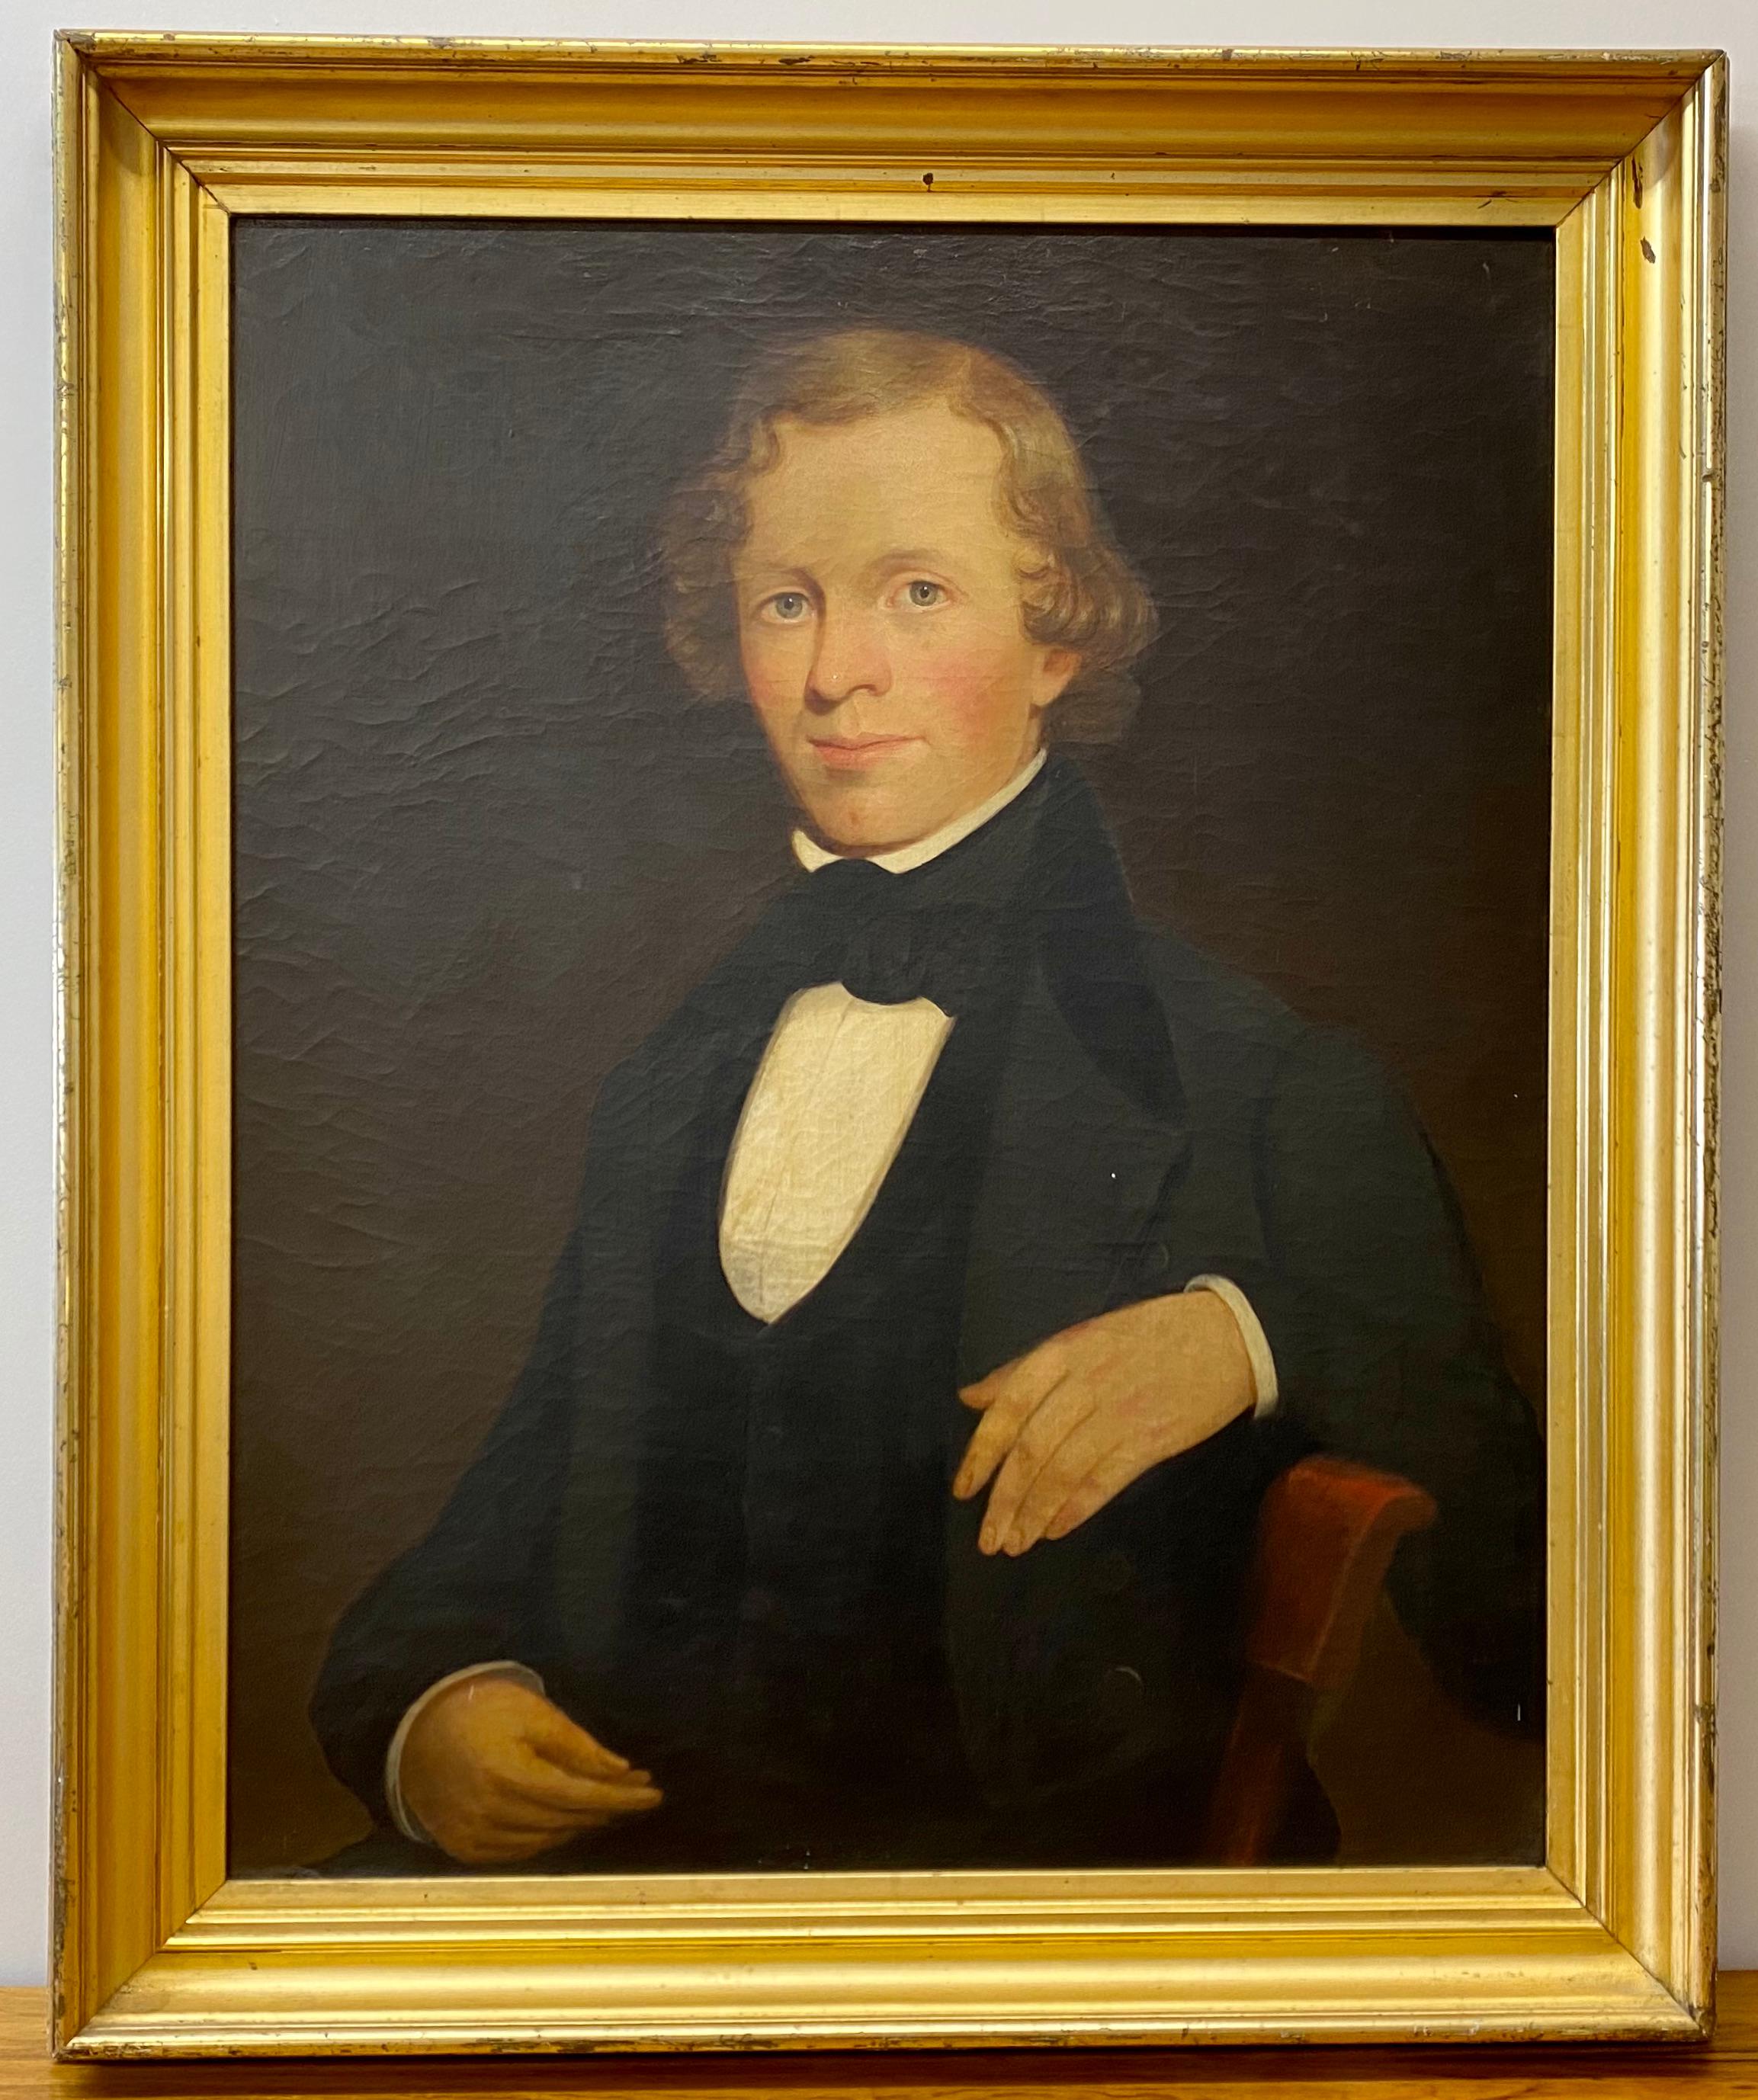 Unknown Portrait Painting - 19th Century Oil Portrait of a Handsome Young Gentleman